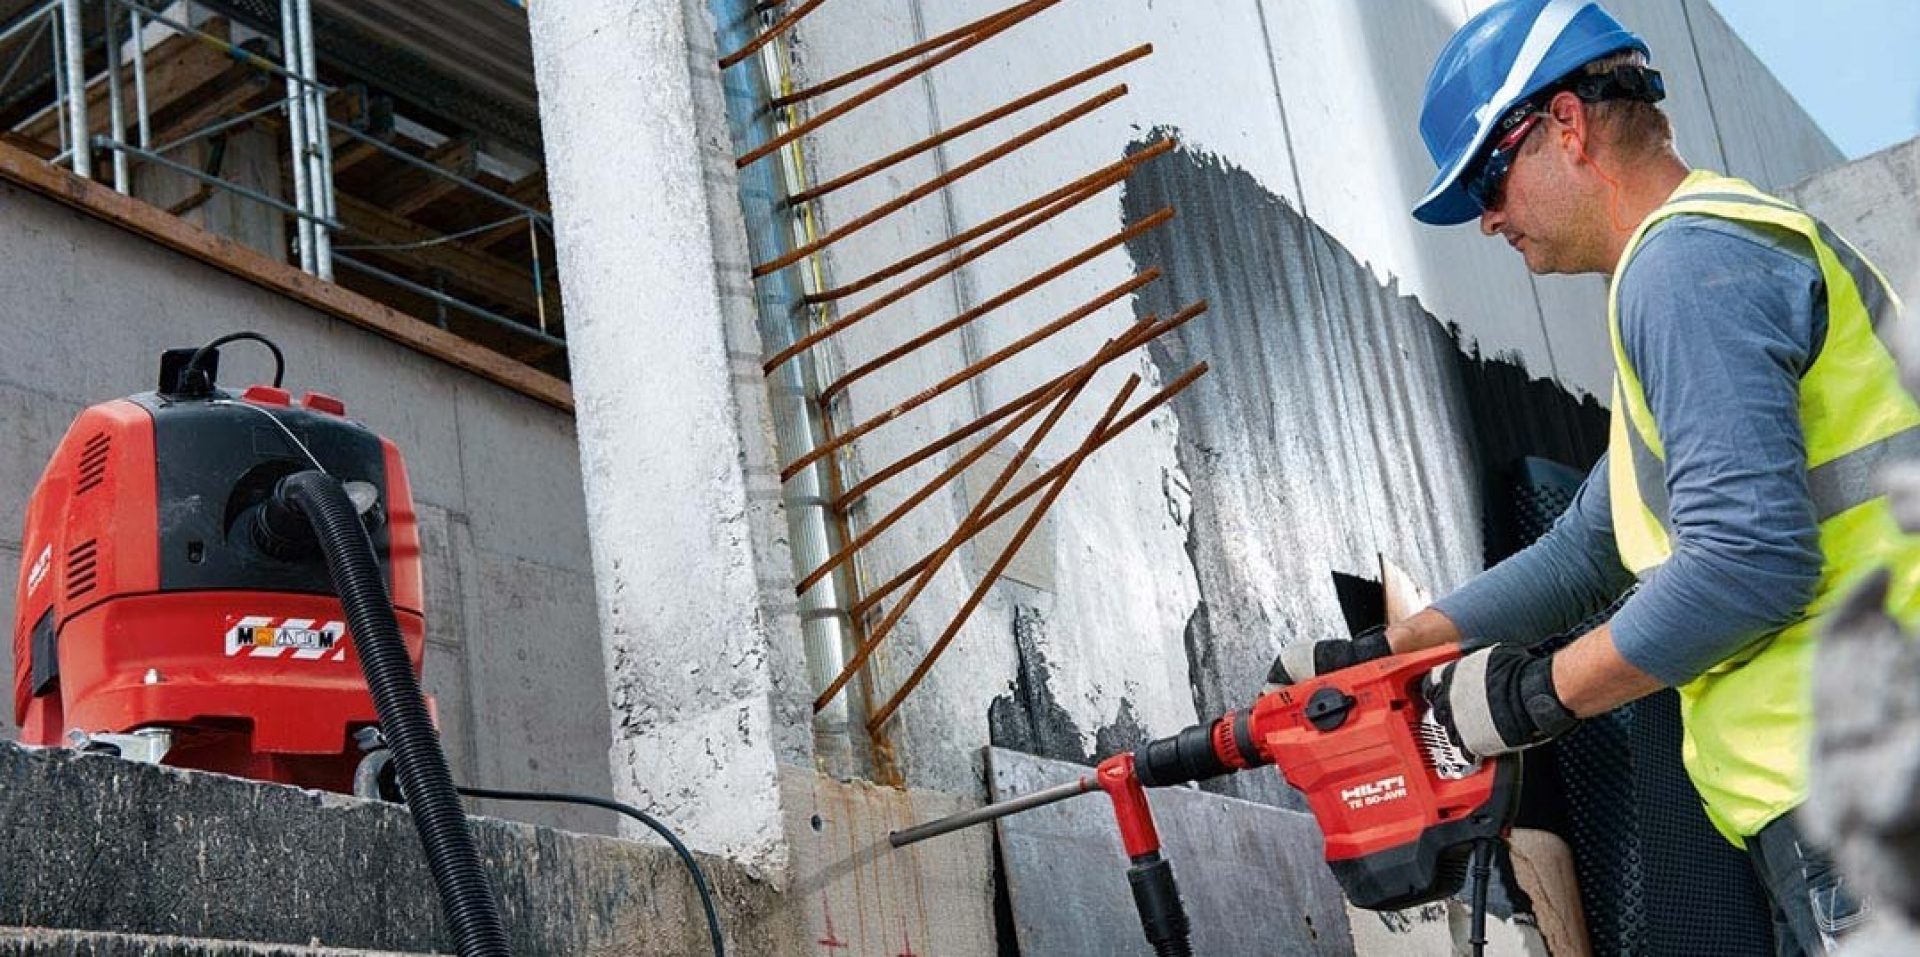 Hilti Chisels for breakers